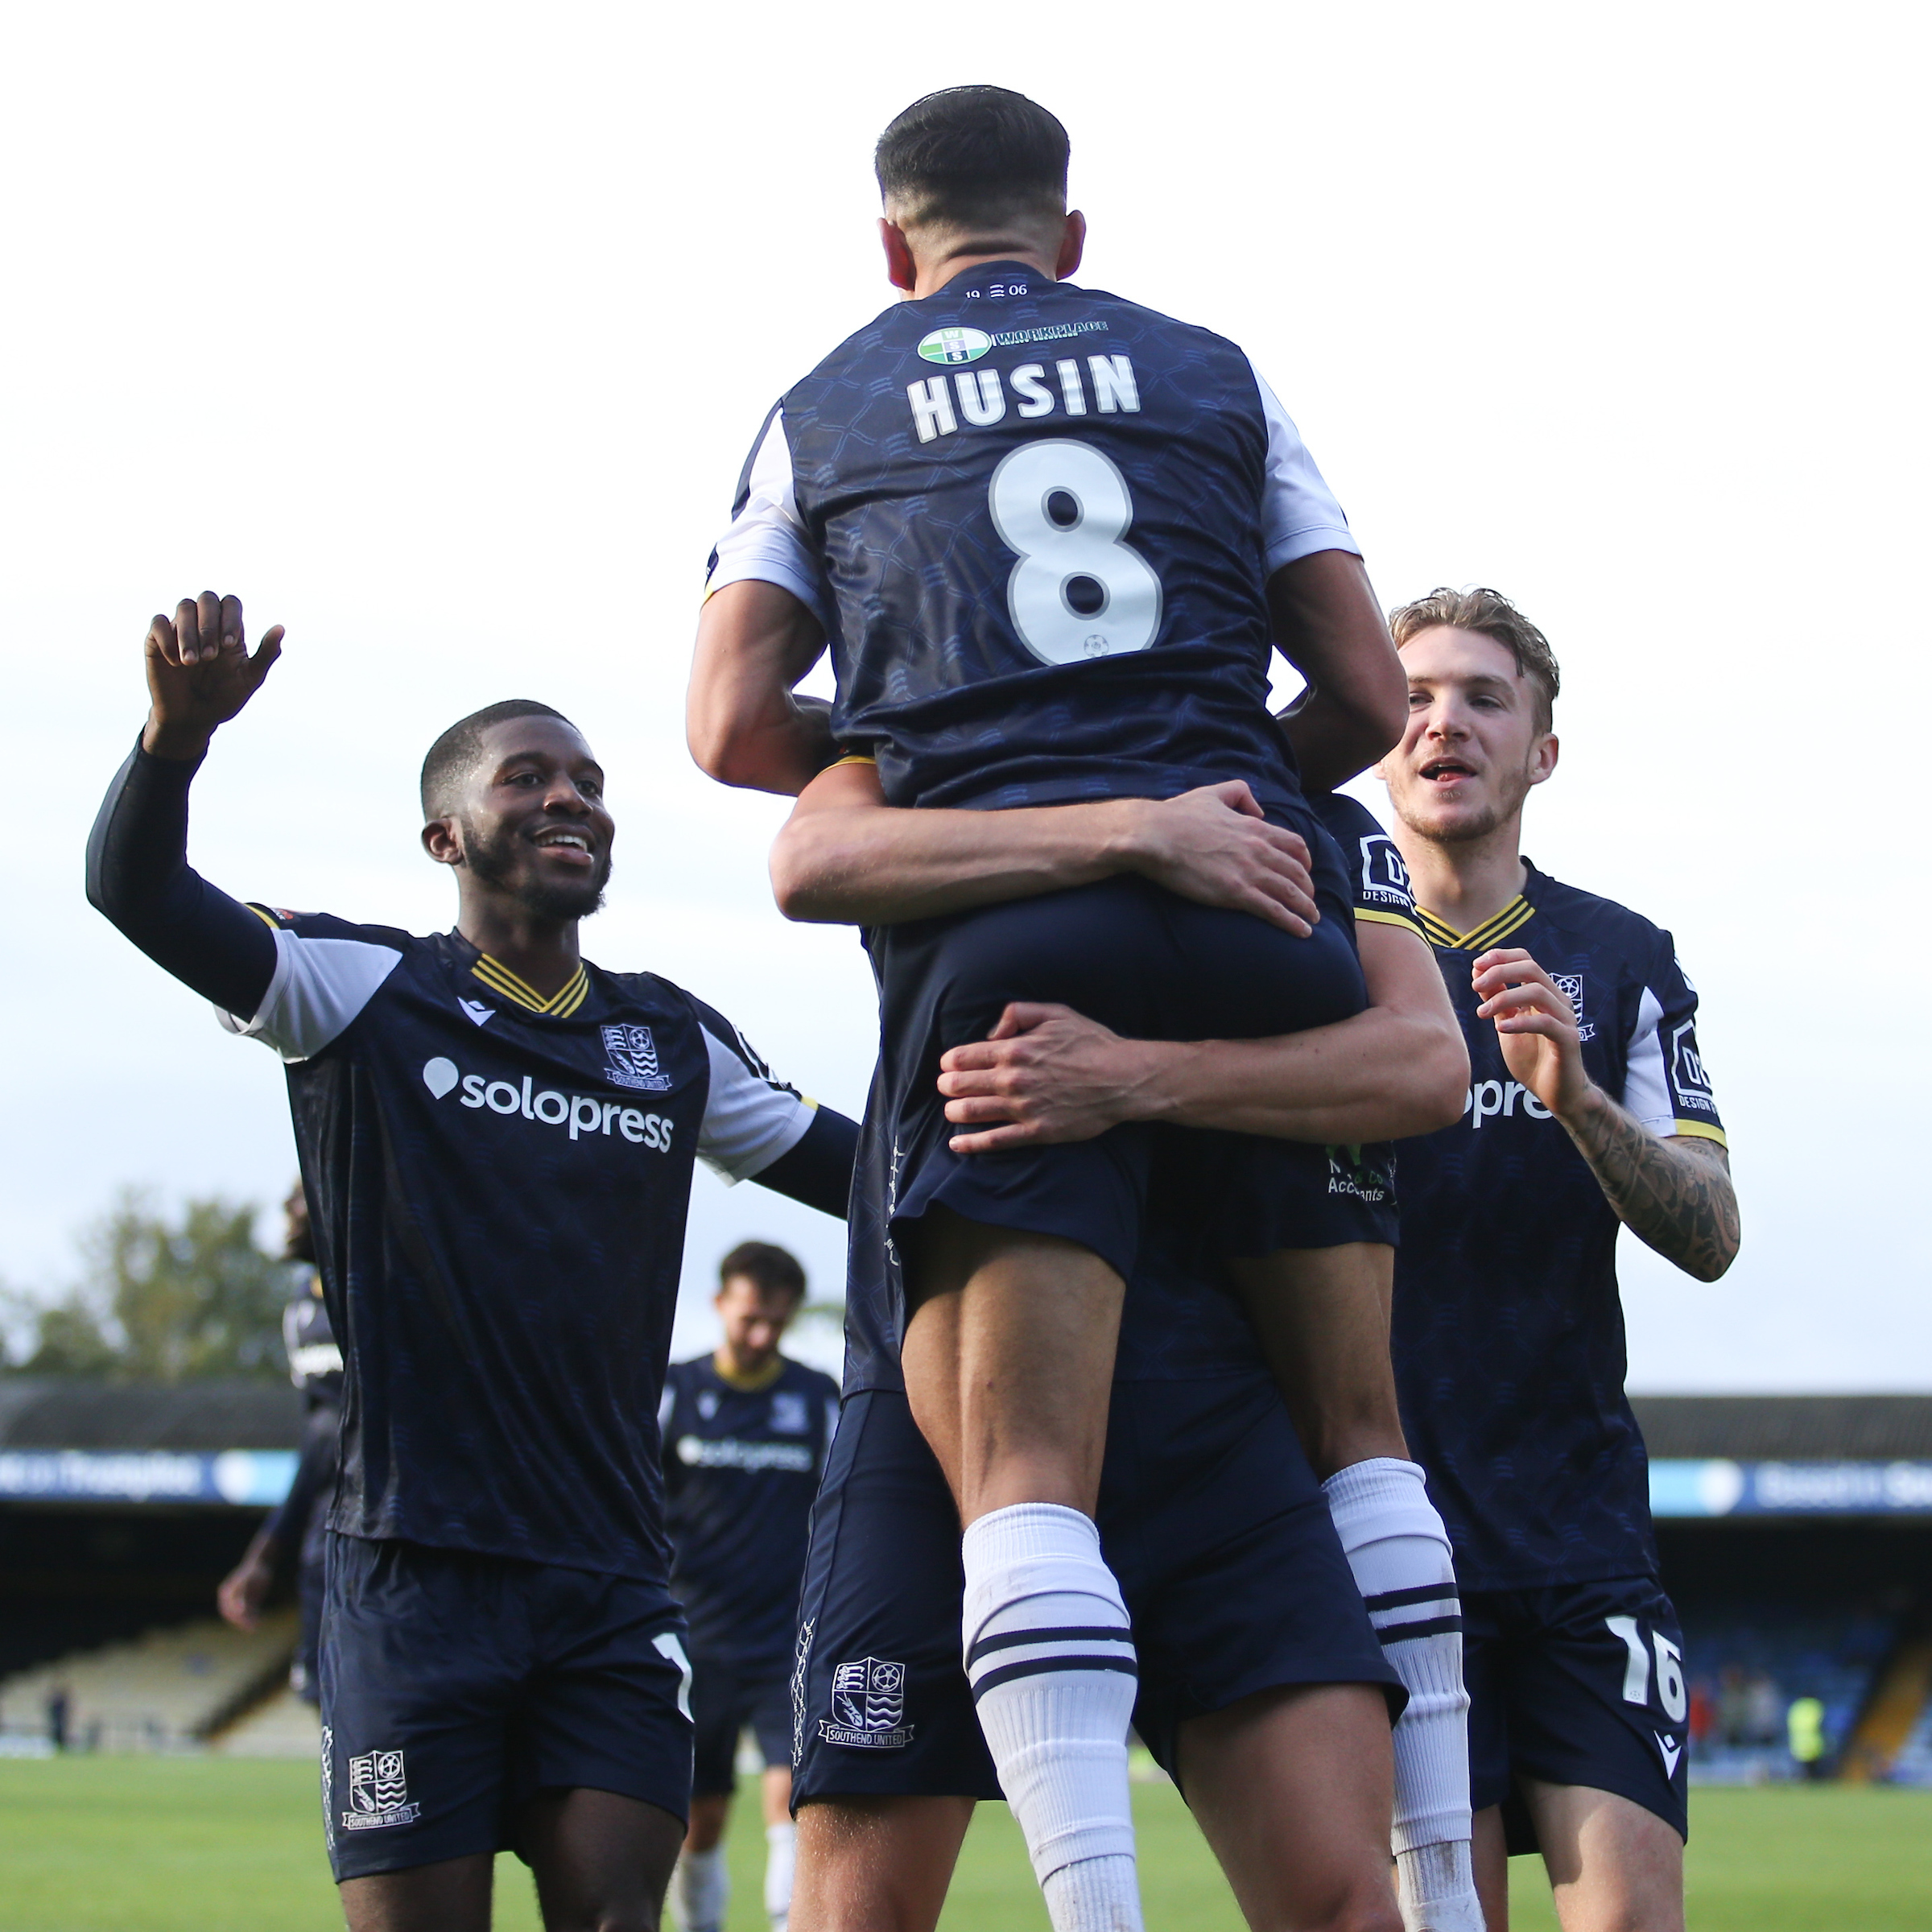 Southend United FC on X: Our unbeaten run comes to an end.   / X